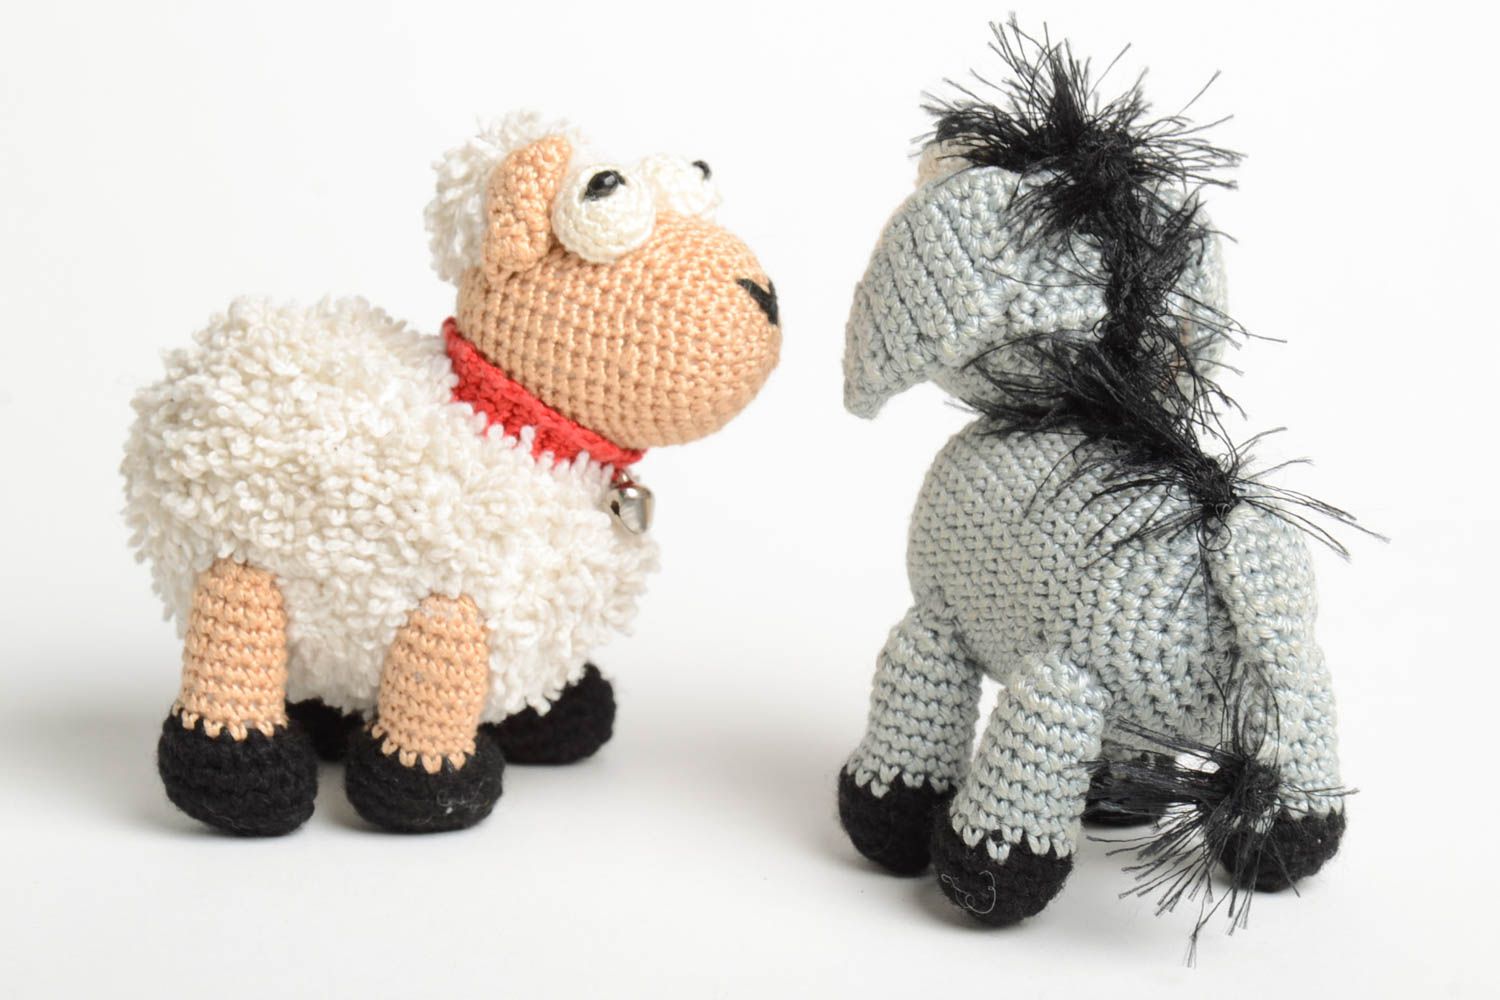 Handmade toy set of 2 items decor ideas gift for baby crocheted toy animal toy photo 4